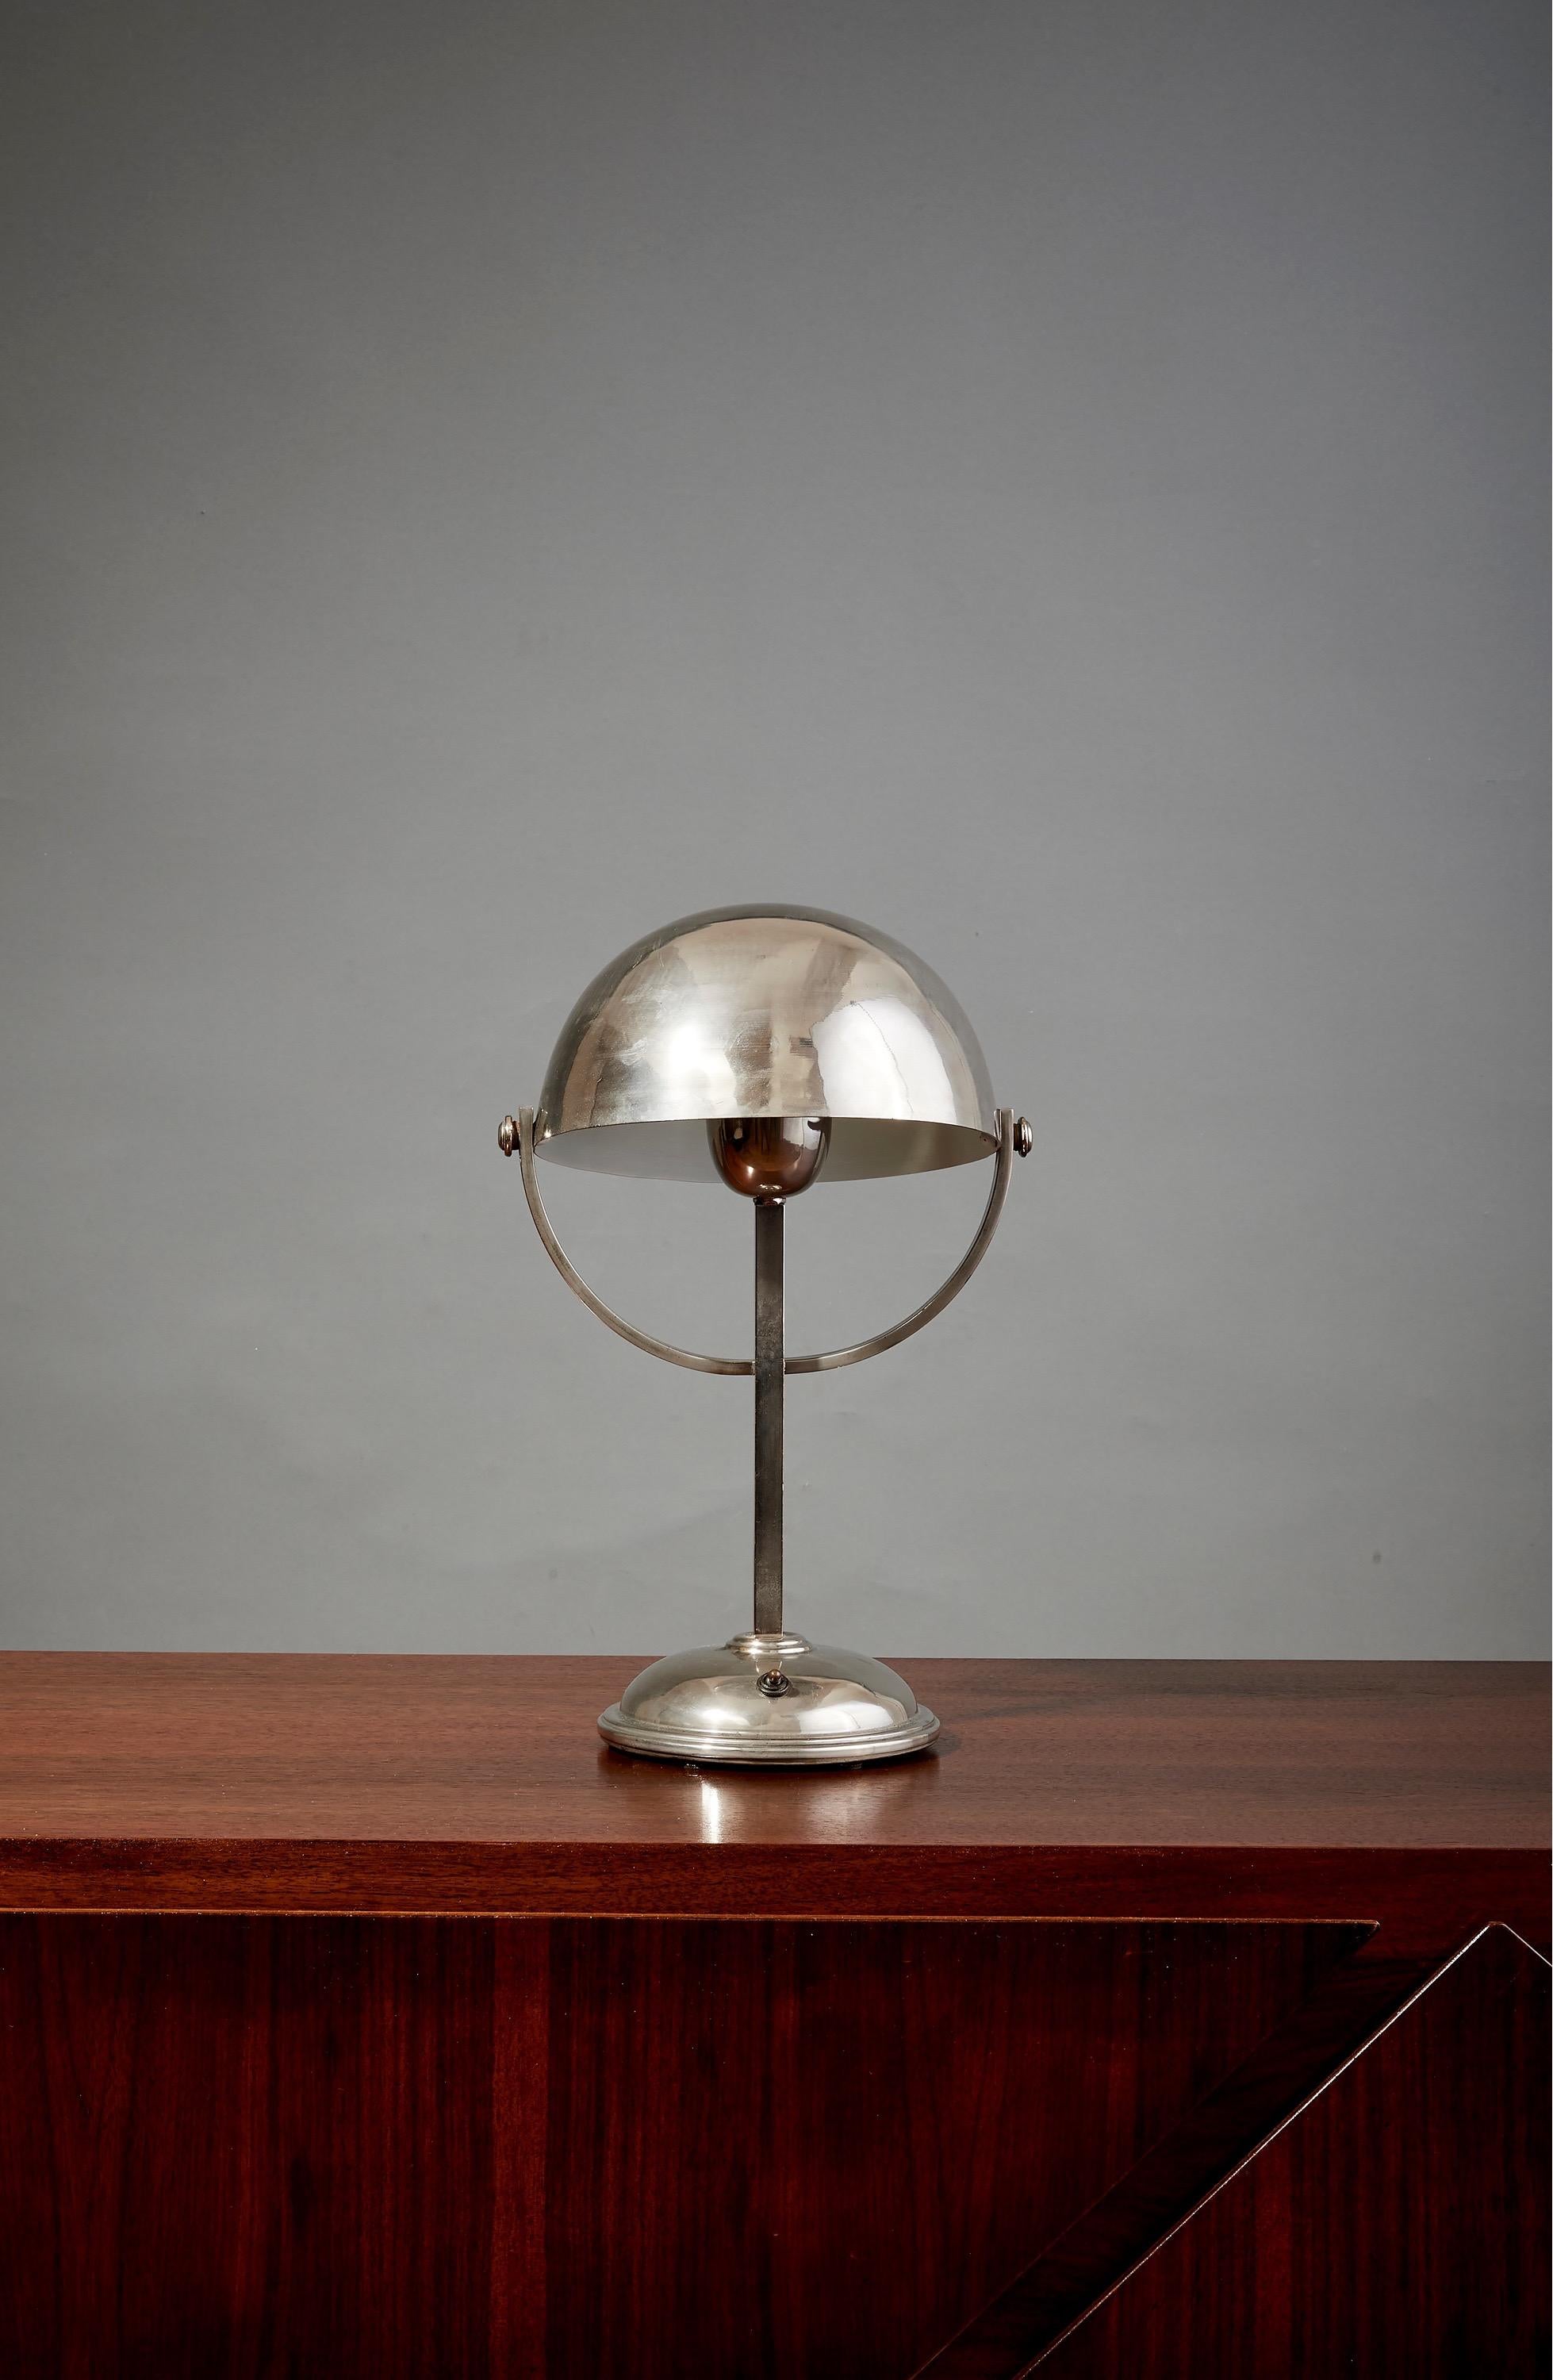 Felix Aublet Style Nickel-Plated Table Lamp with Rounded Shade, France 1930's For Sale 6